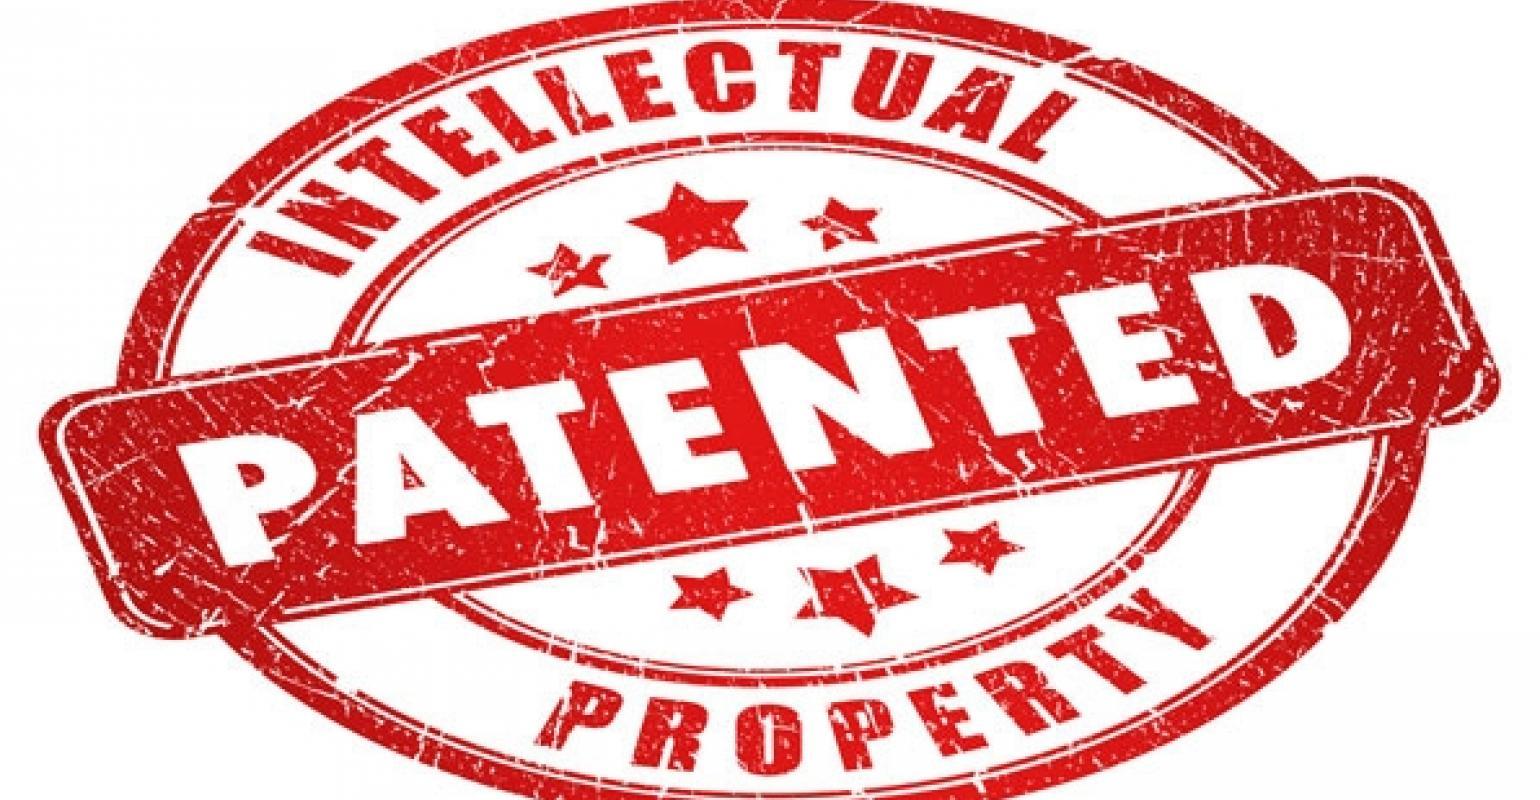 Patent Logo - US Companies File Record-High Patent Applications in Europe ...